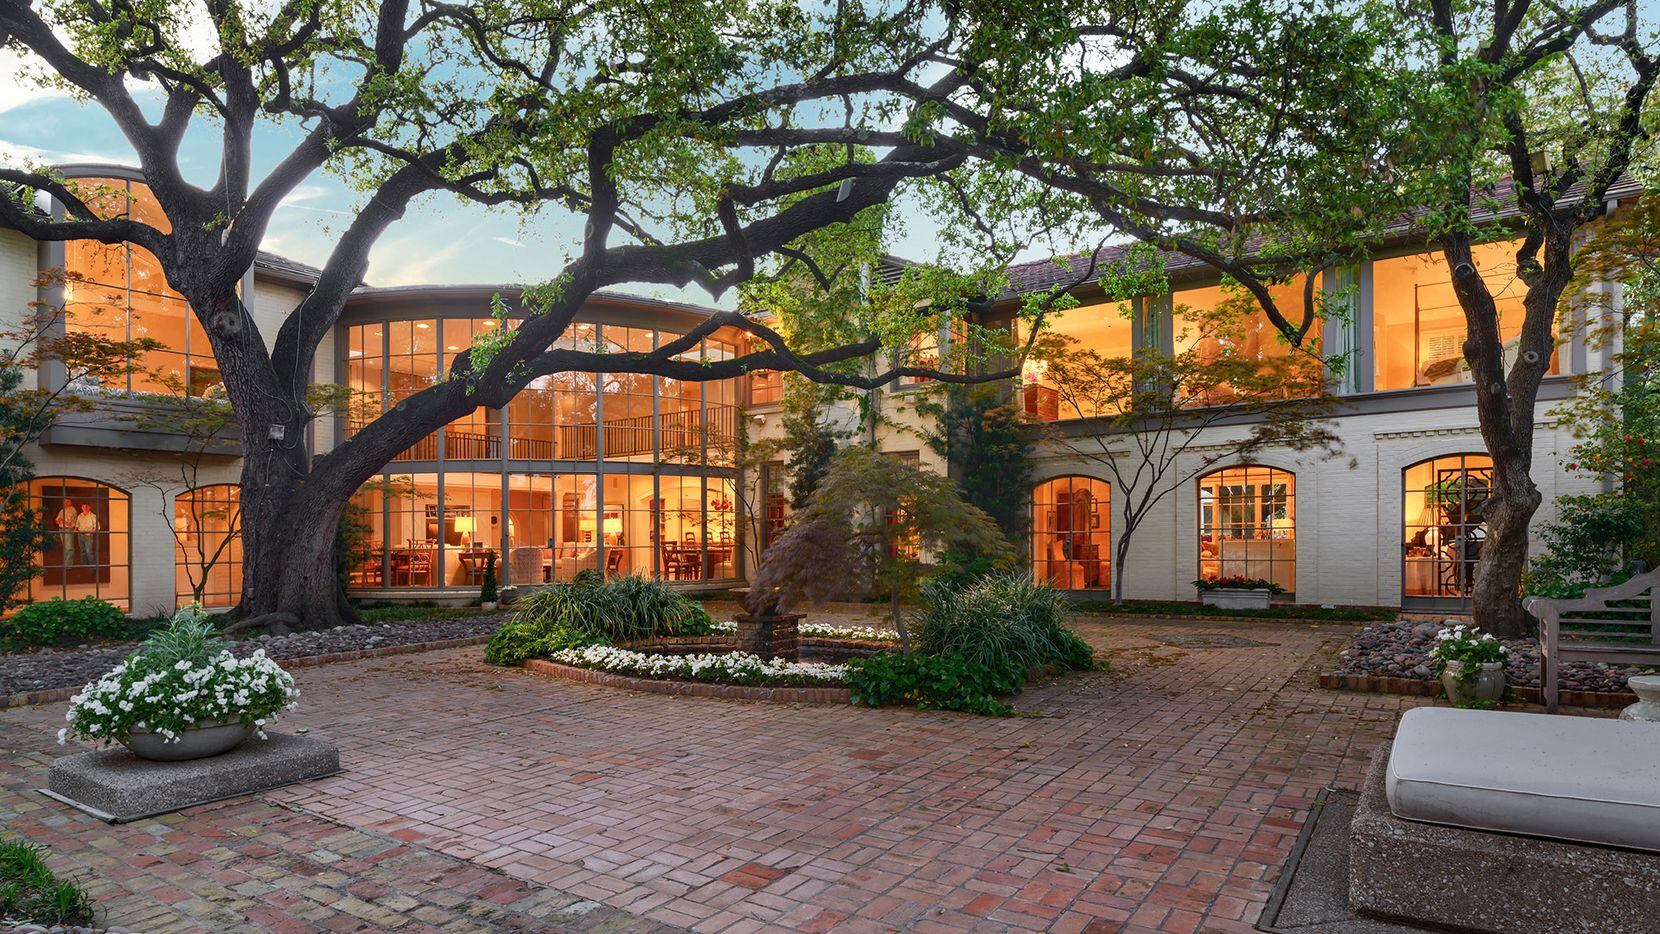 This estate was sold off-market by the luxury firm Allie Beth Allman & Associates.